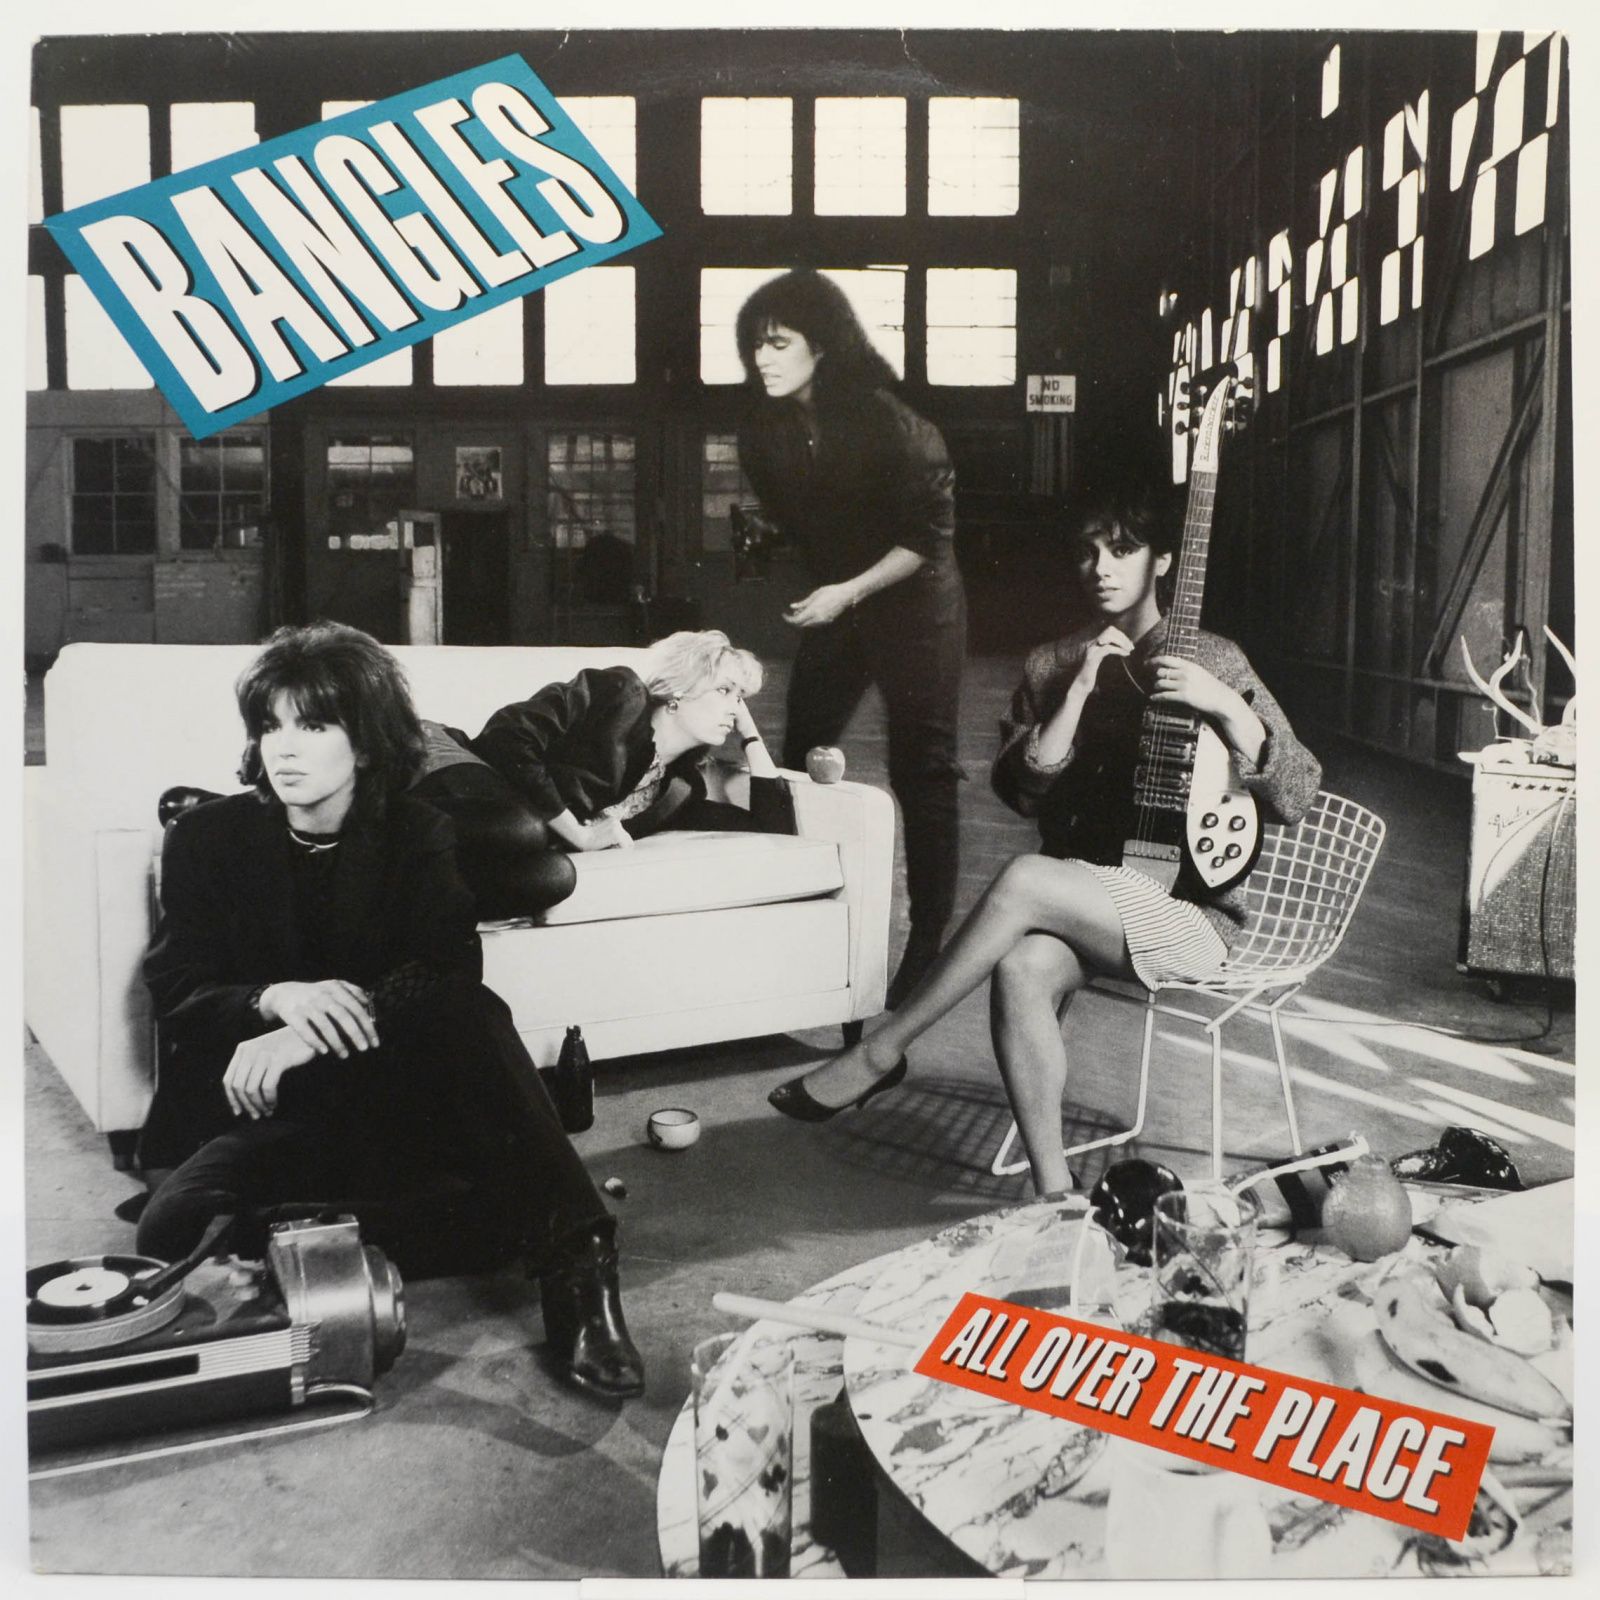 Bangles — All Over The Place, 1985